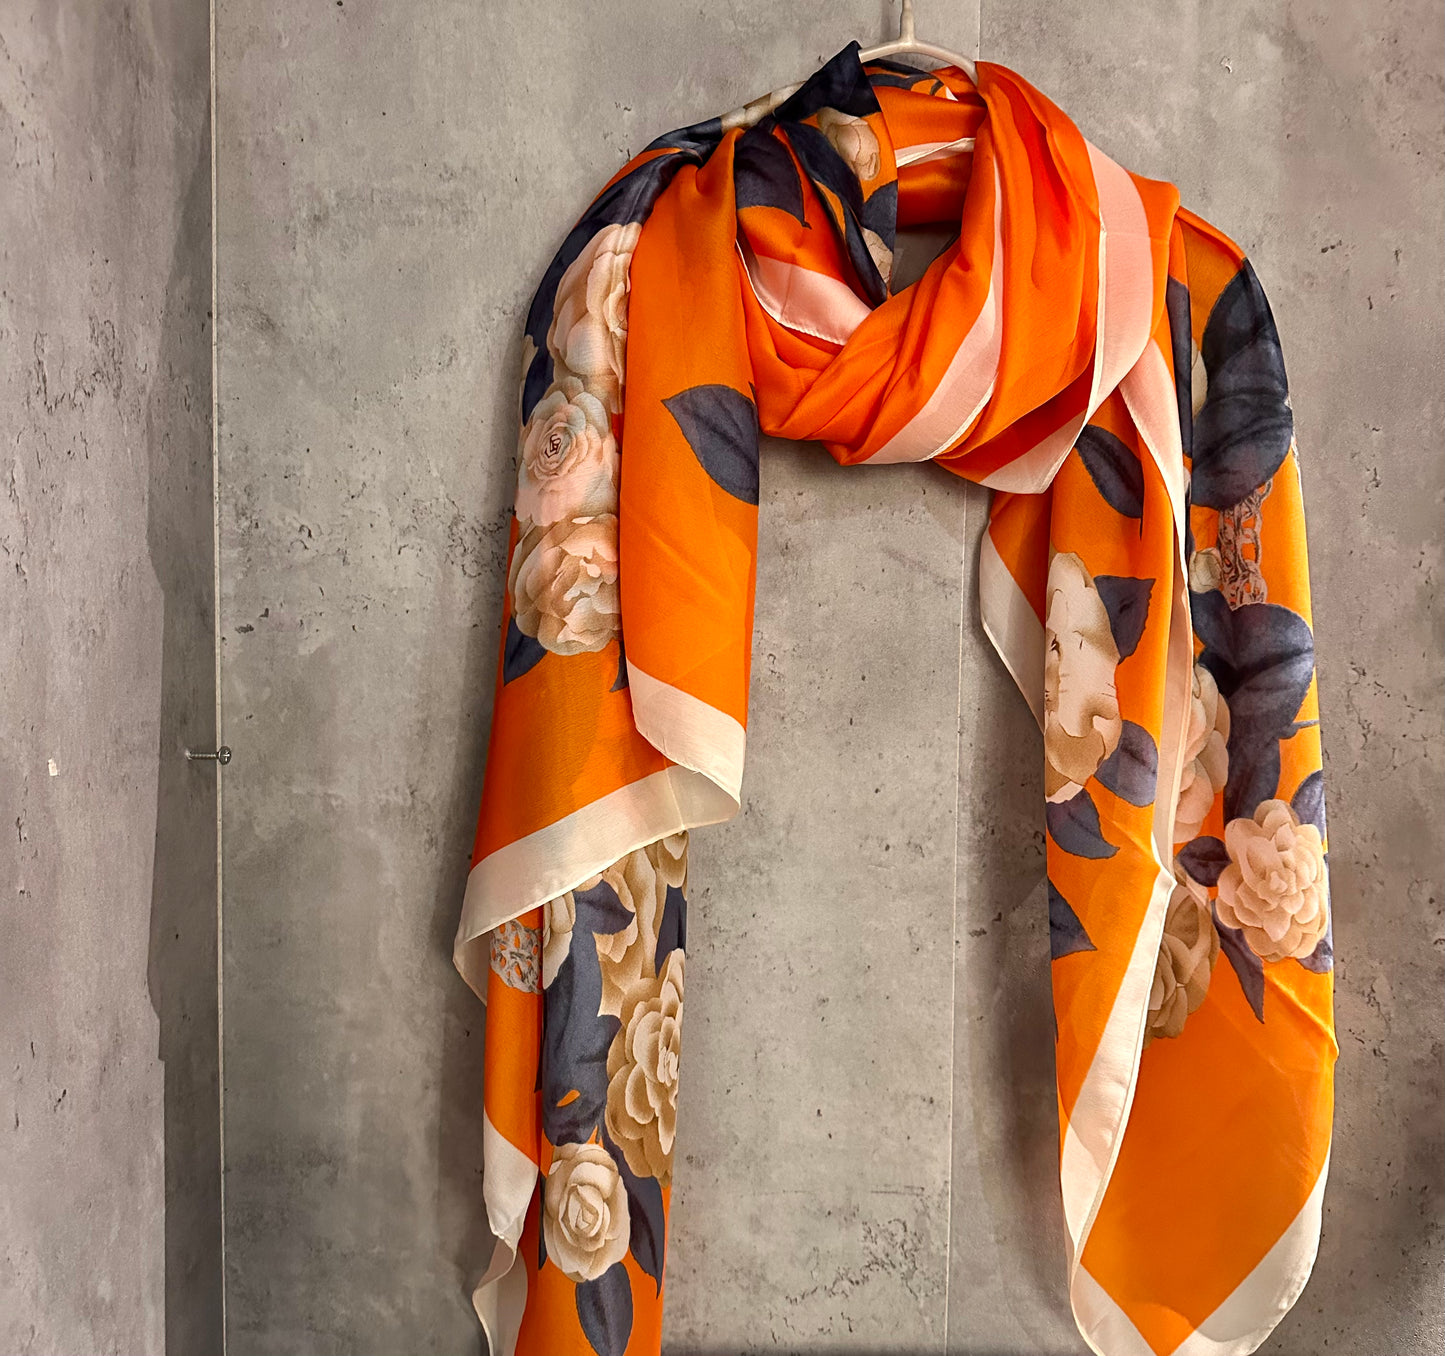 White Roses Pattern Orange Silk Scarf/Spring Summer Scarf/Gifts For Mom/Scarf Women/Gifts For Her Birthday Christmas/UK Seller